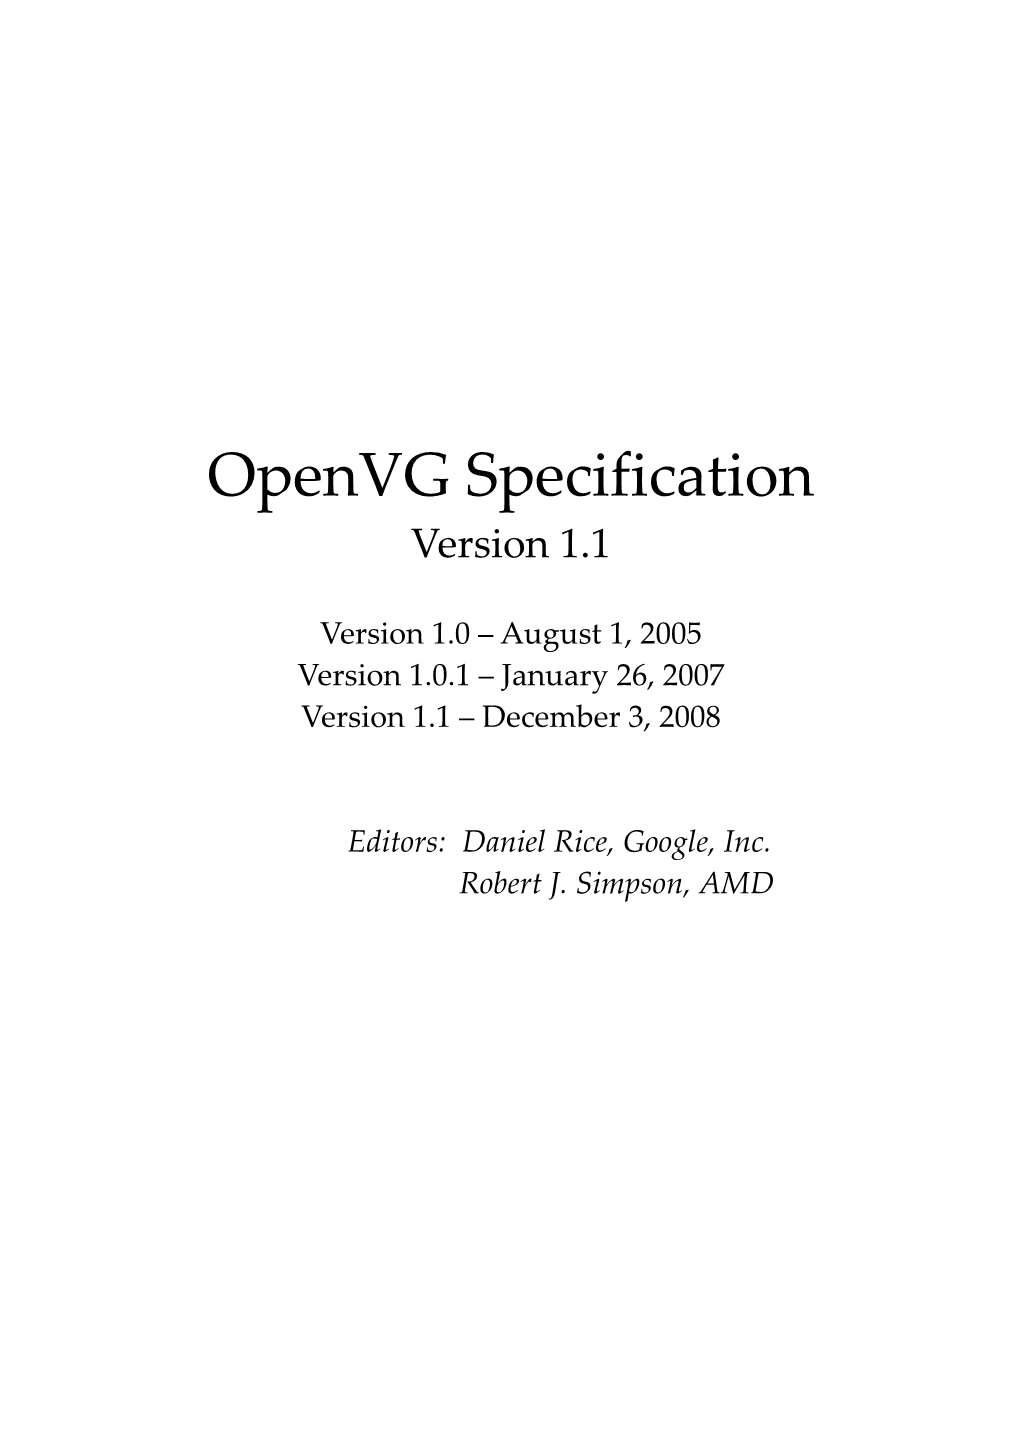 Openvg Specification Version 1.1